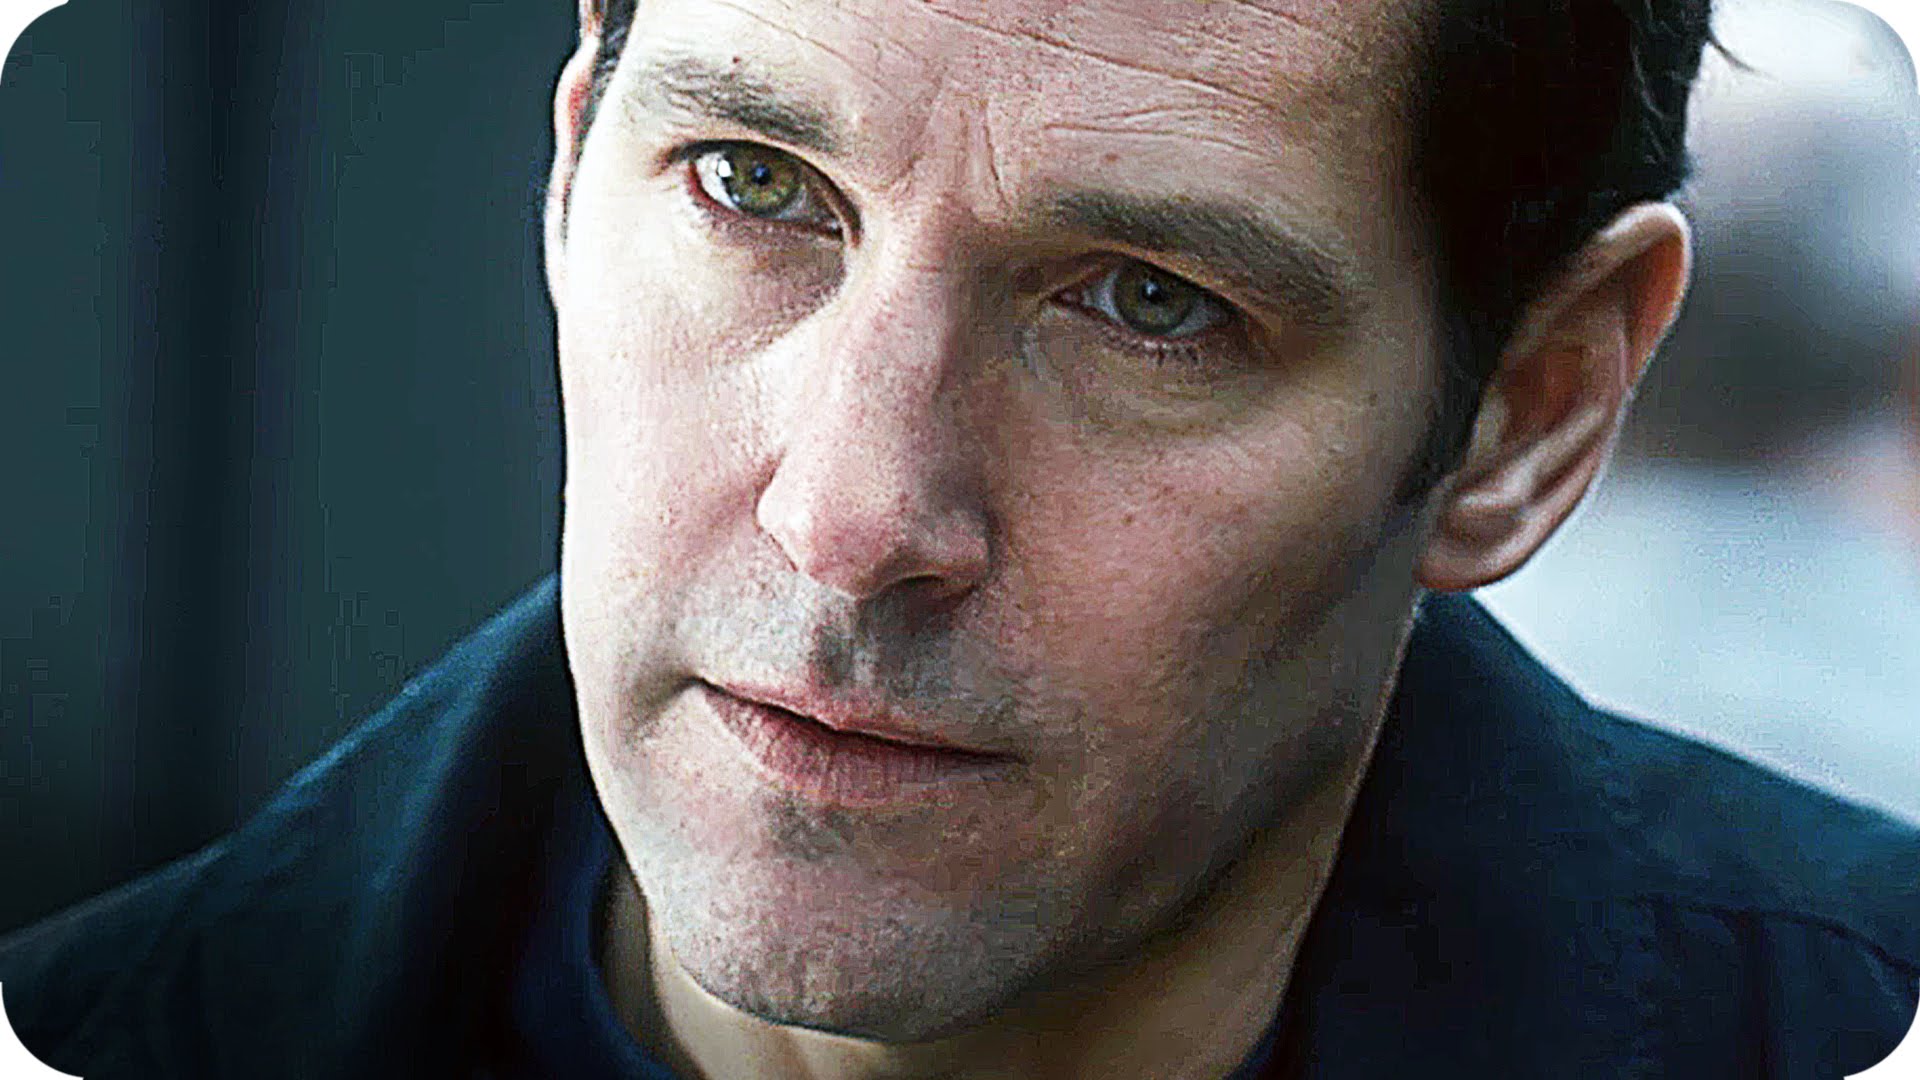 Paul Rudd Gets Serious: The Fundamentals of Caring | HuffPost